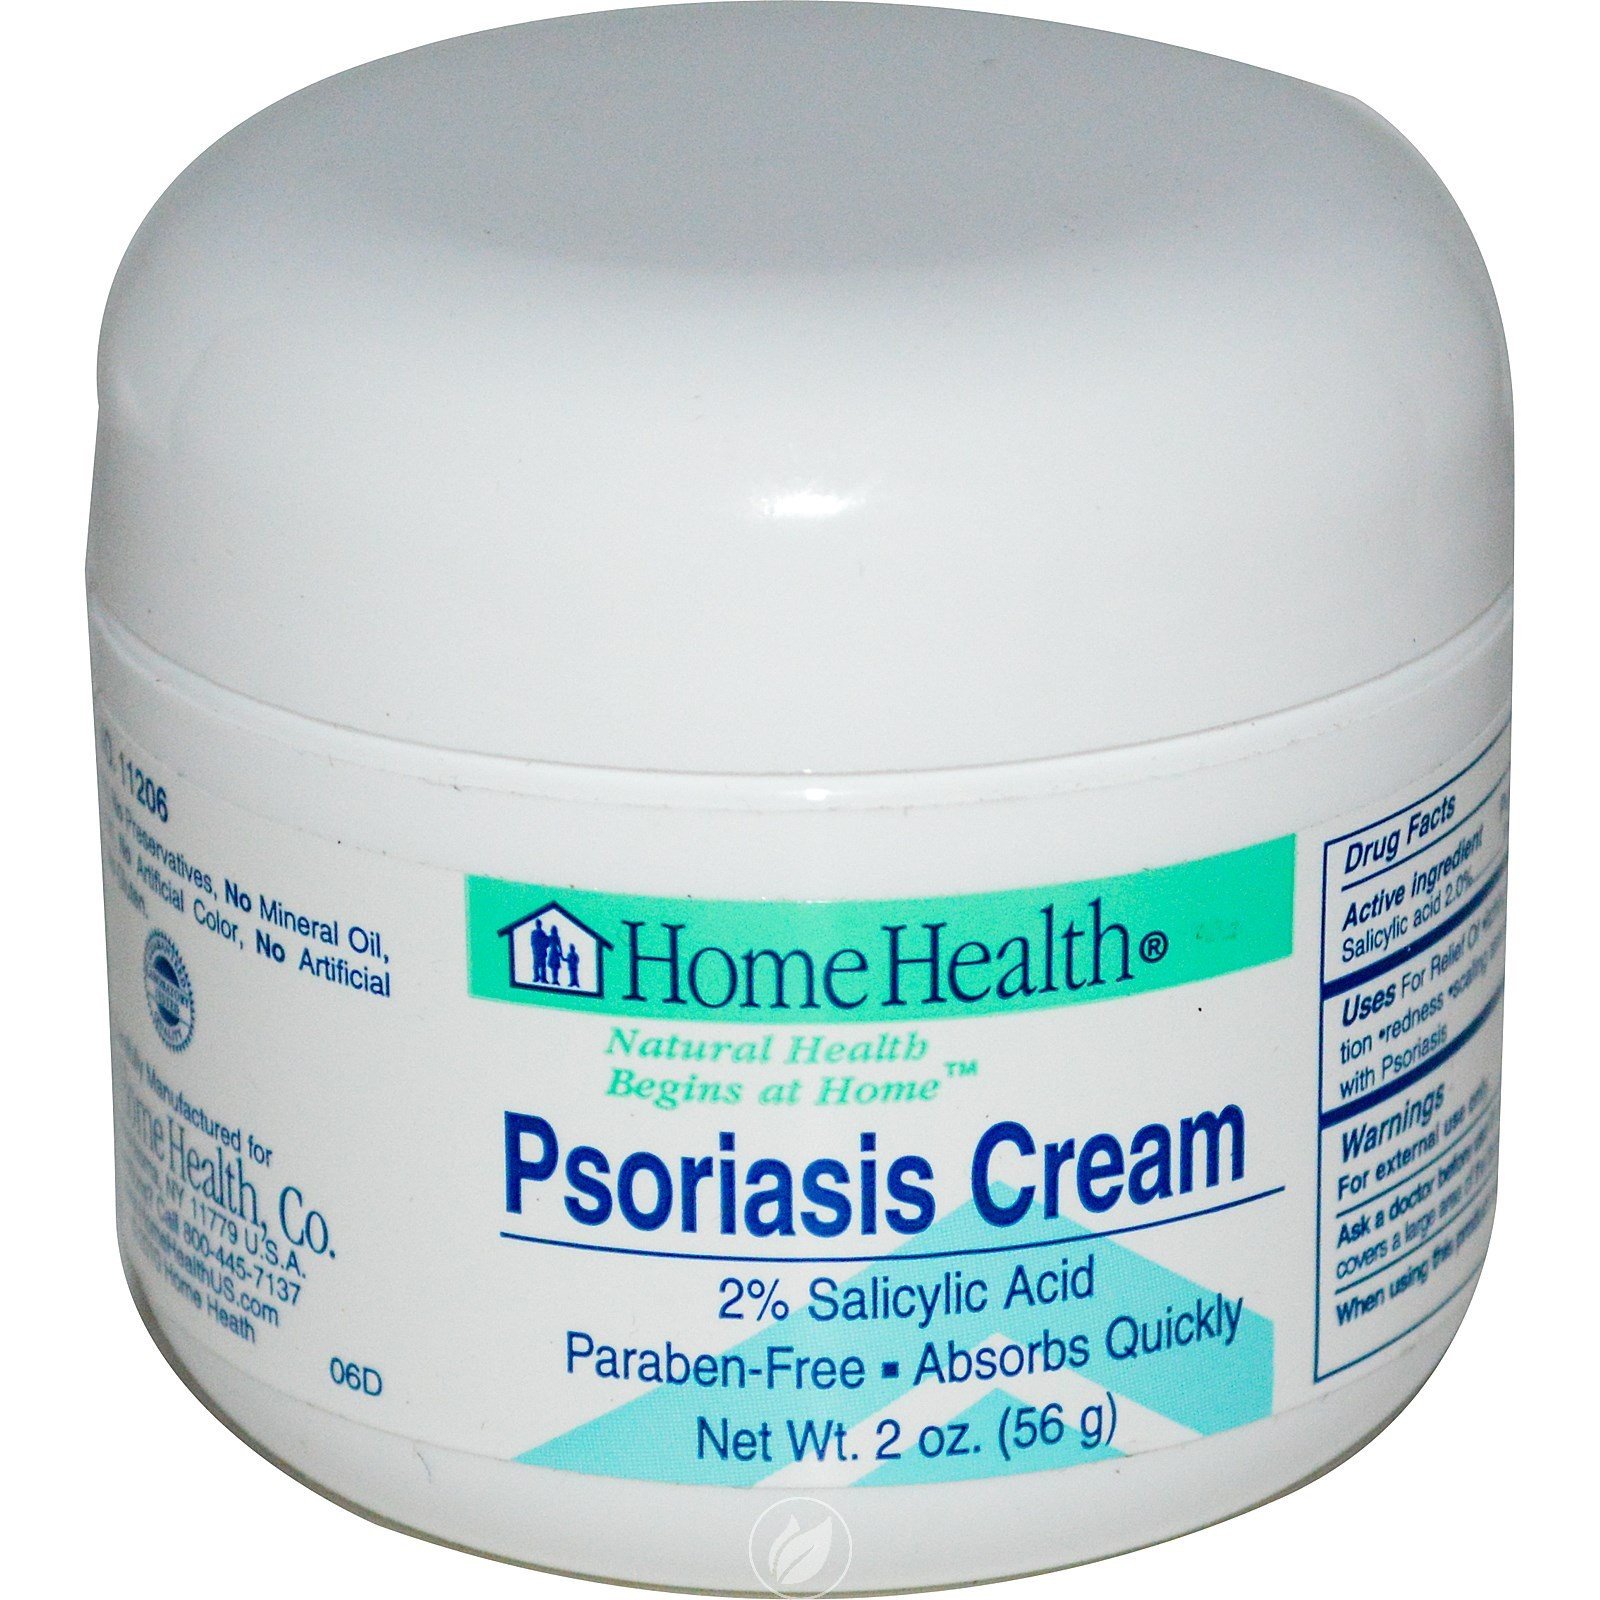 Psoriasis Cream 2 FL Oz by Home Health, Pack of 2